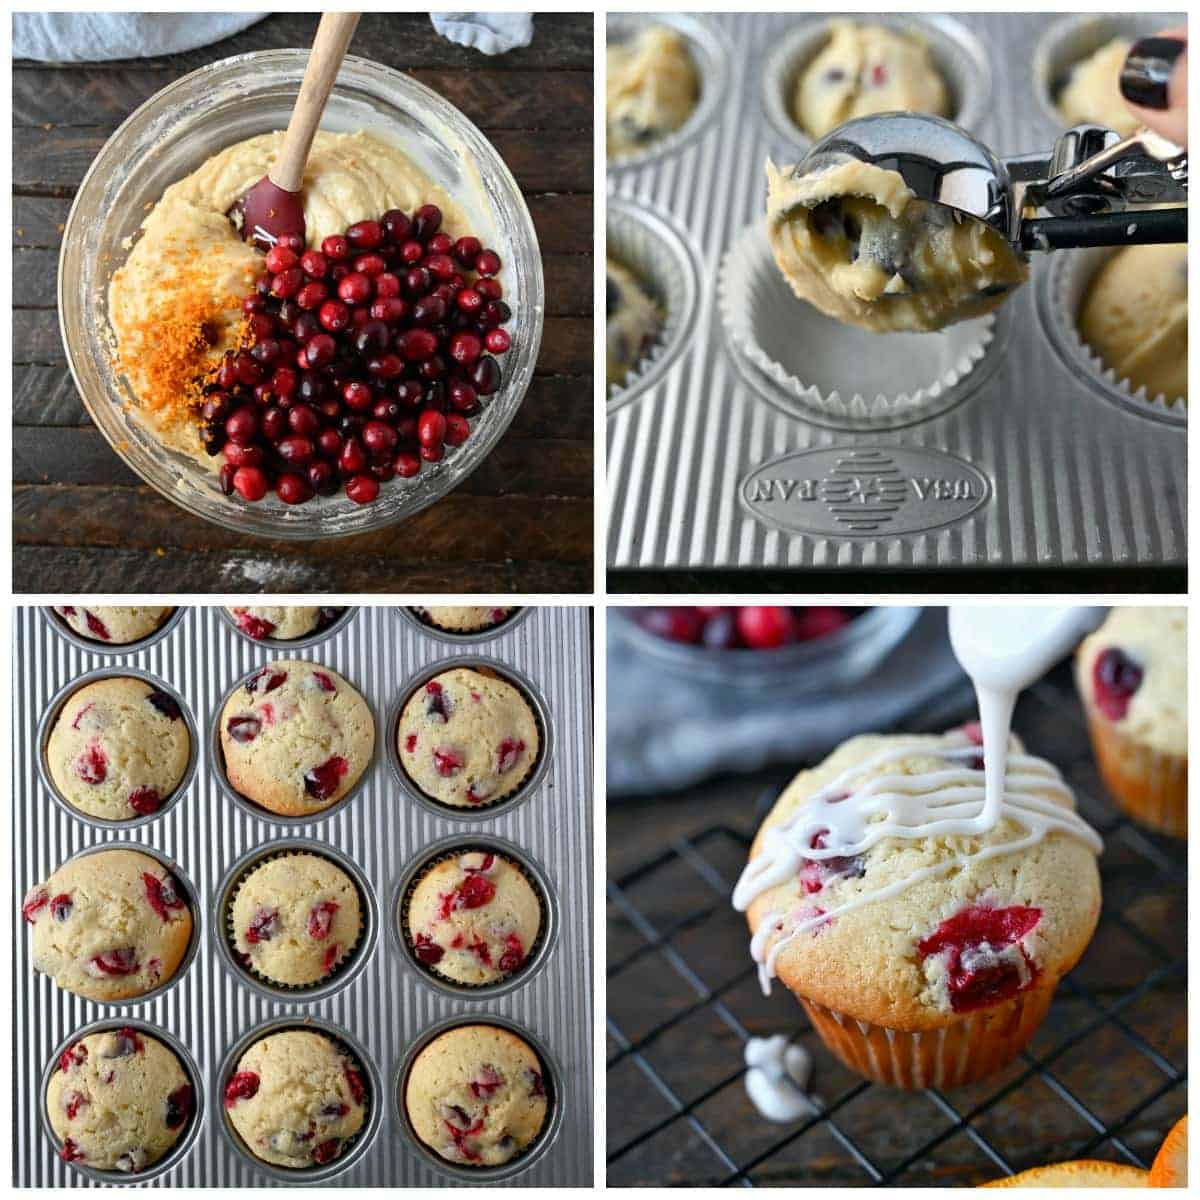 Four process photos. First one, orange zest and cranberries added into the batter. Second one, an icecream scooper dropping muffin mix into the tin. Third one, all muffins baked in a 12 cup miffin tin. Fourth one, icing being drizzled on top of a muffin.